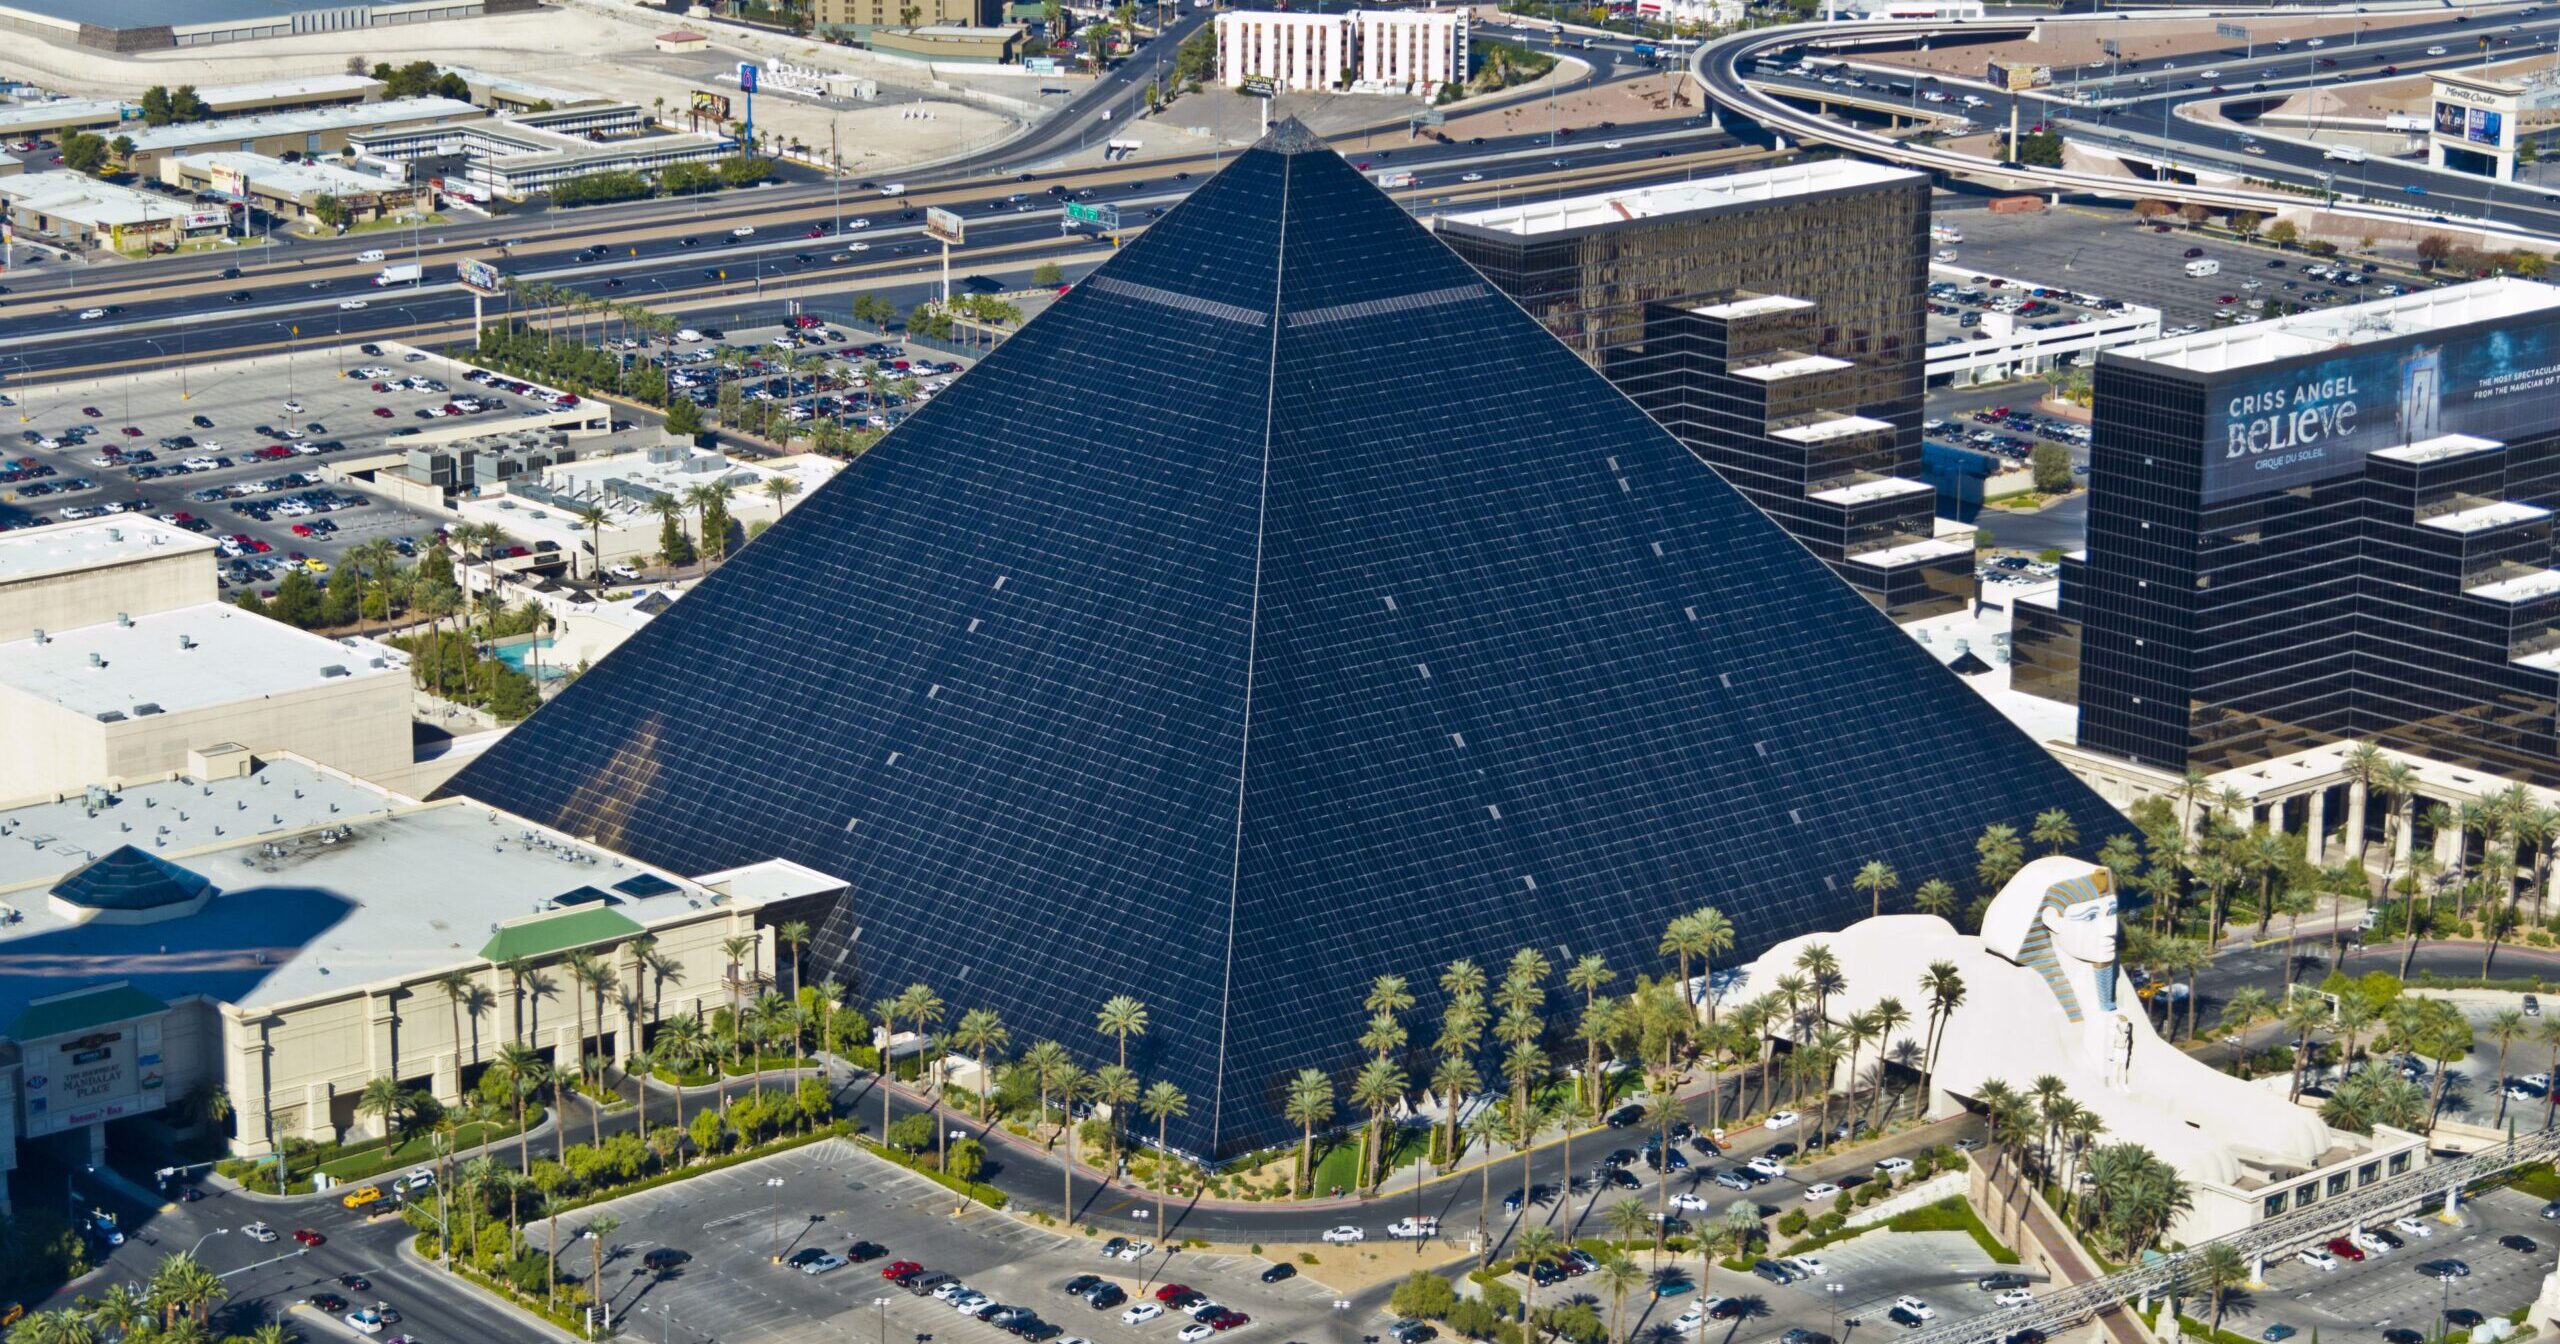 Luxor Las Vegas - A great budget hotels option on the Strip